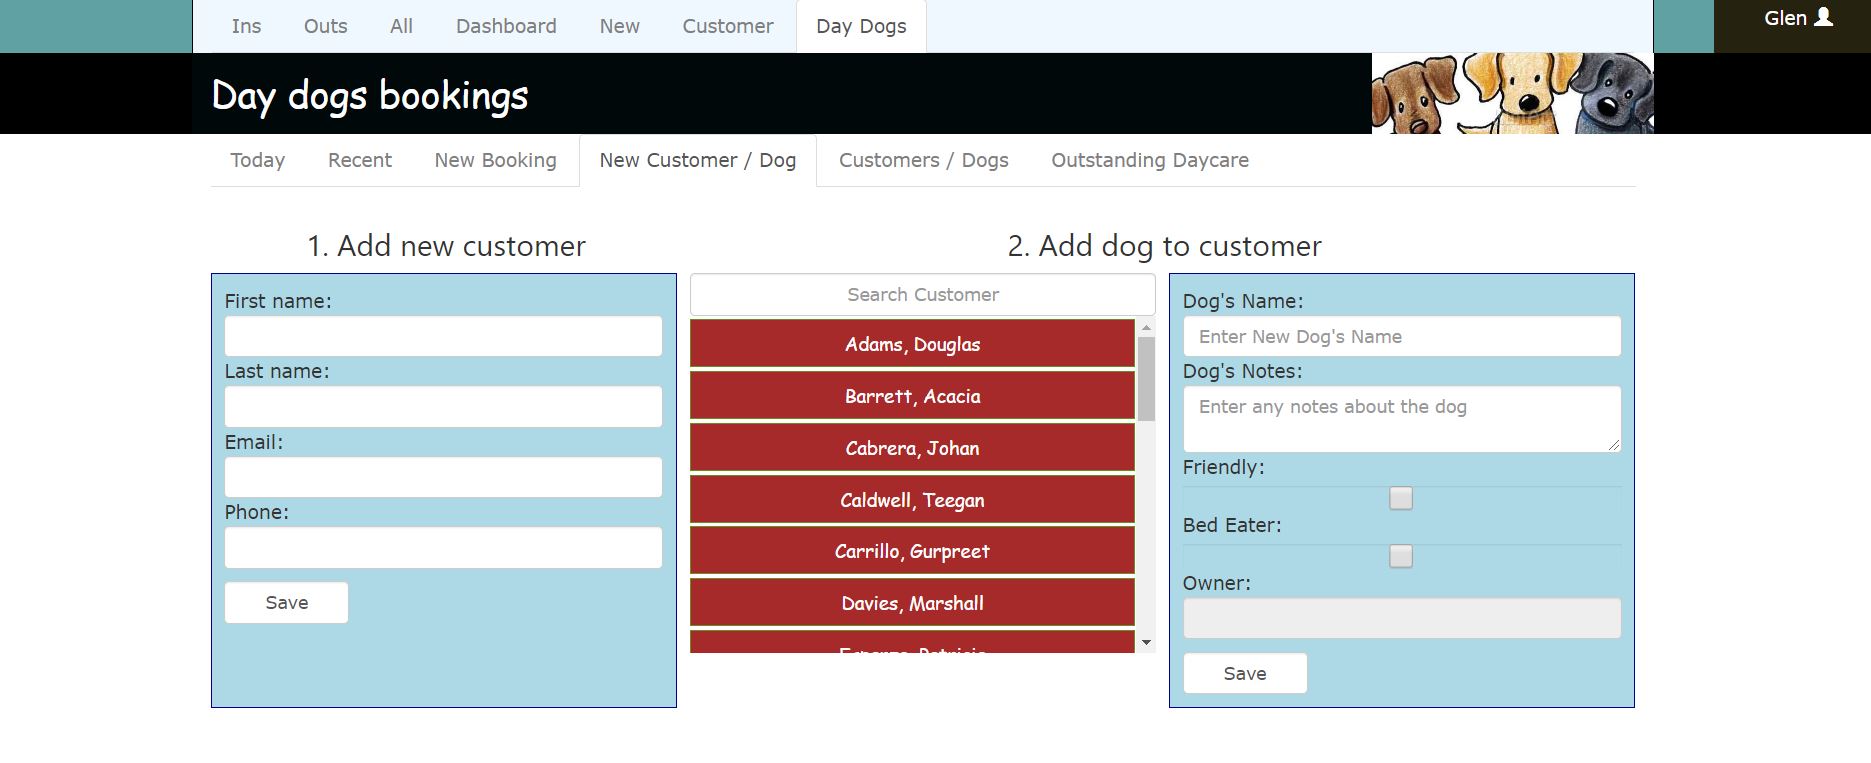 A page where we can add a customer and a daycare dog